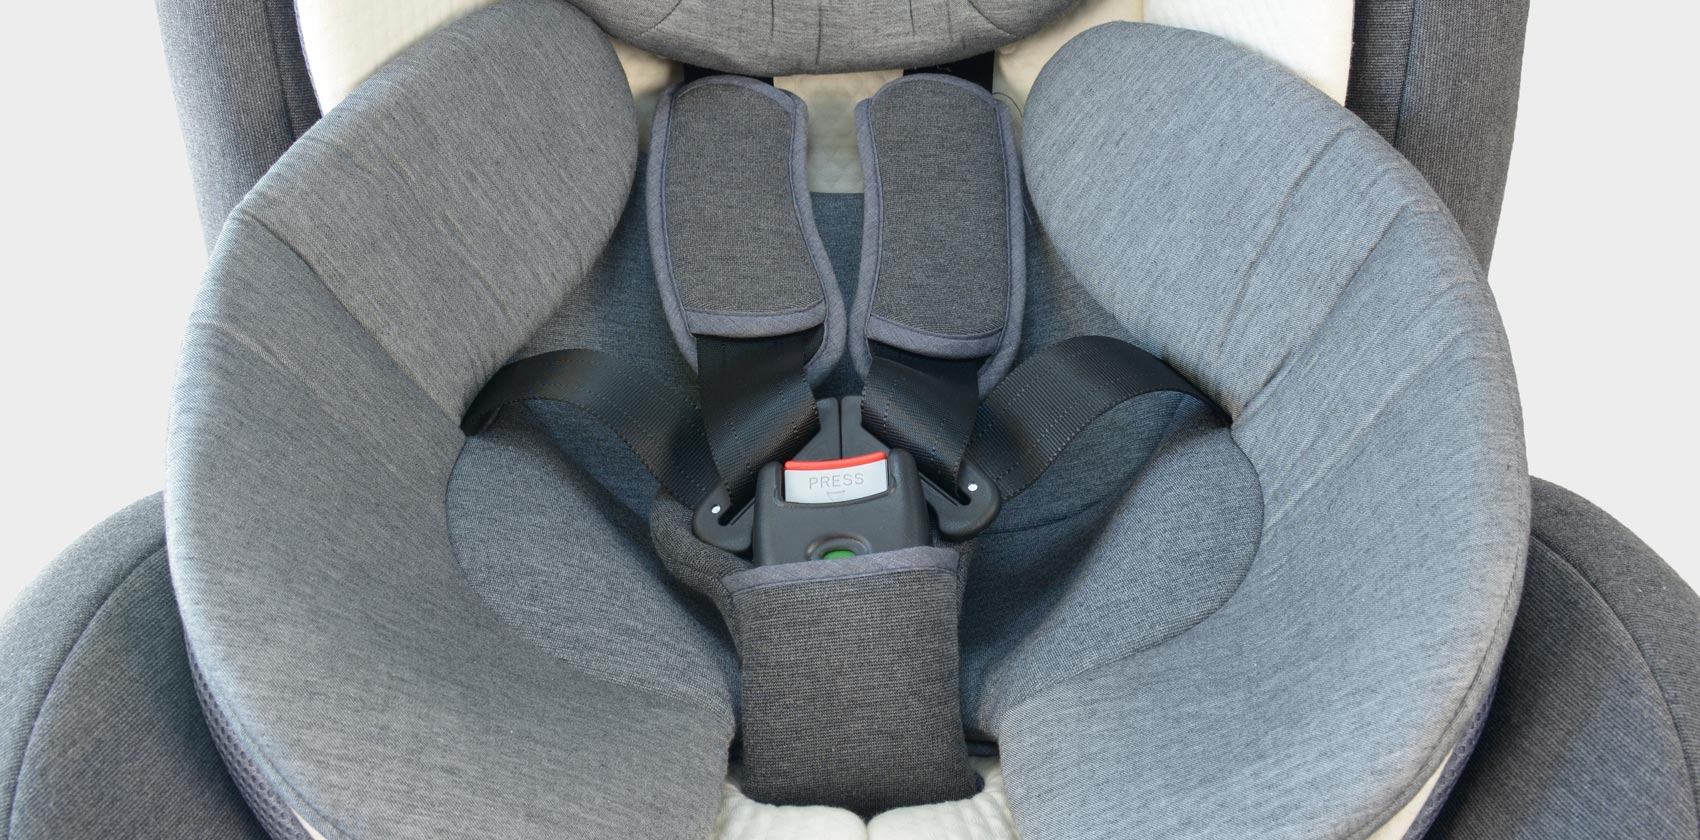 Ducle Daily isofix